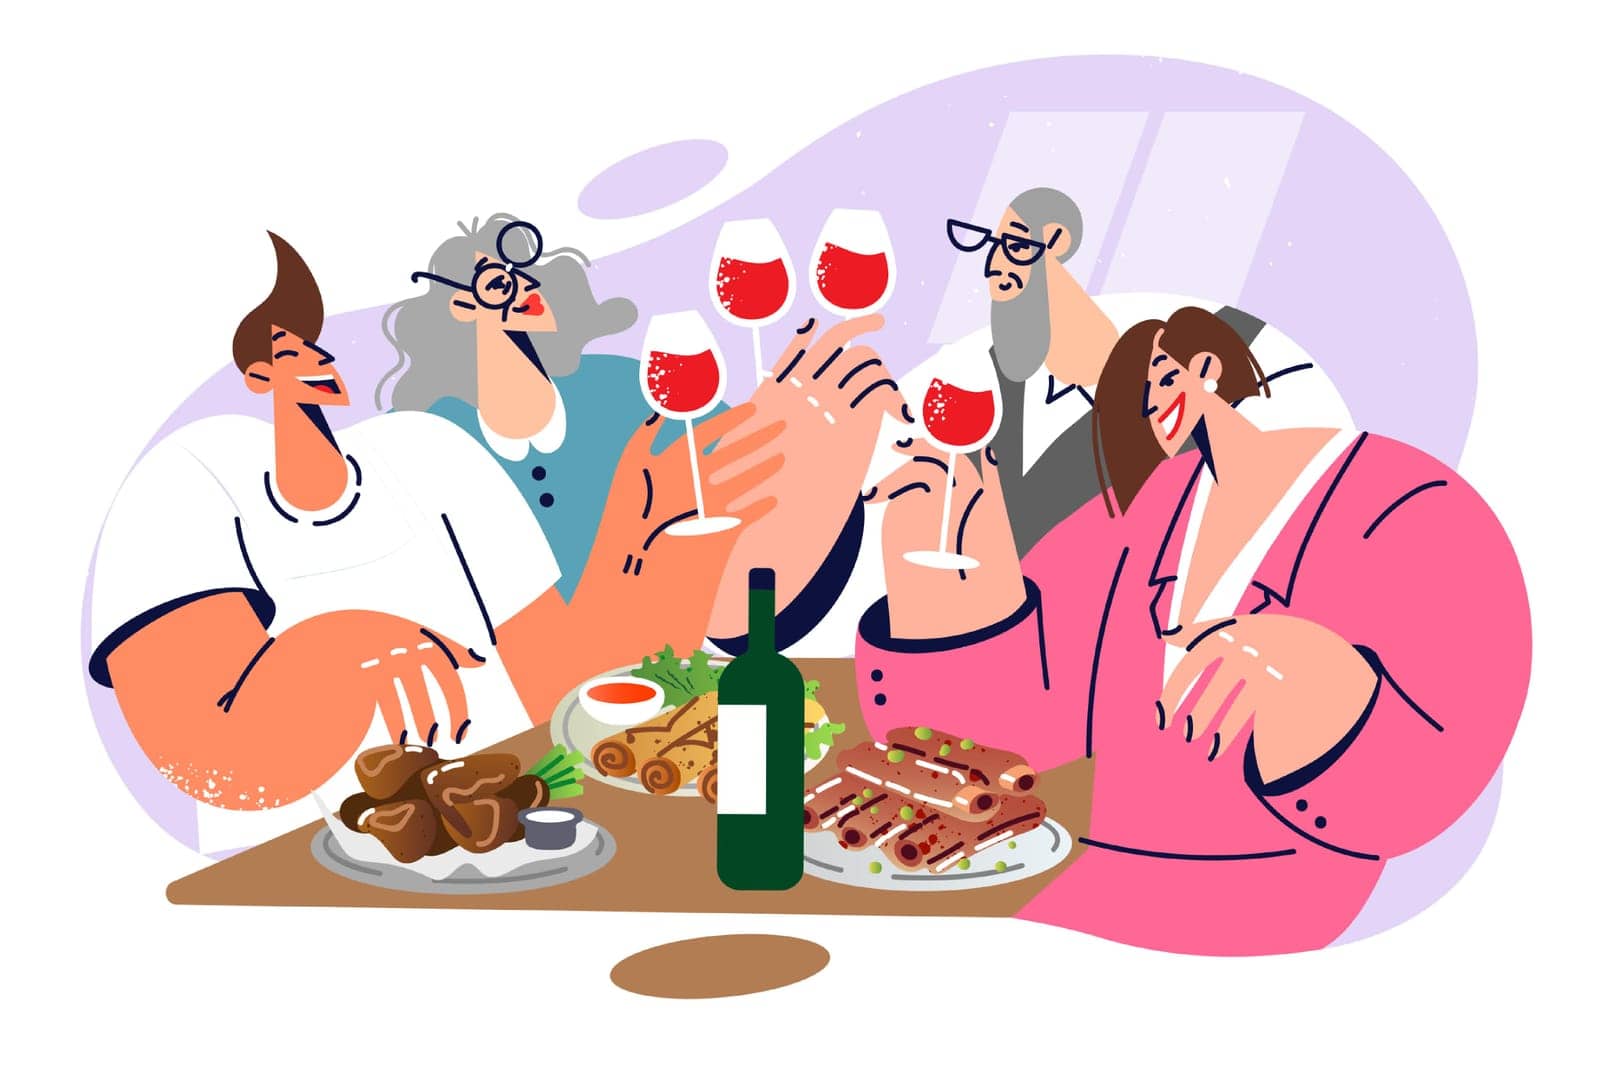 Festive feast of large family with wine and delicious dinner celebrating weekend. Elderly parents and adult children participate in feast together, celebrating wedding anniversary or birthday